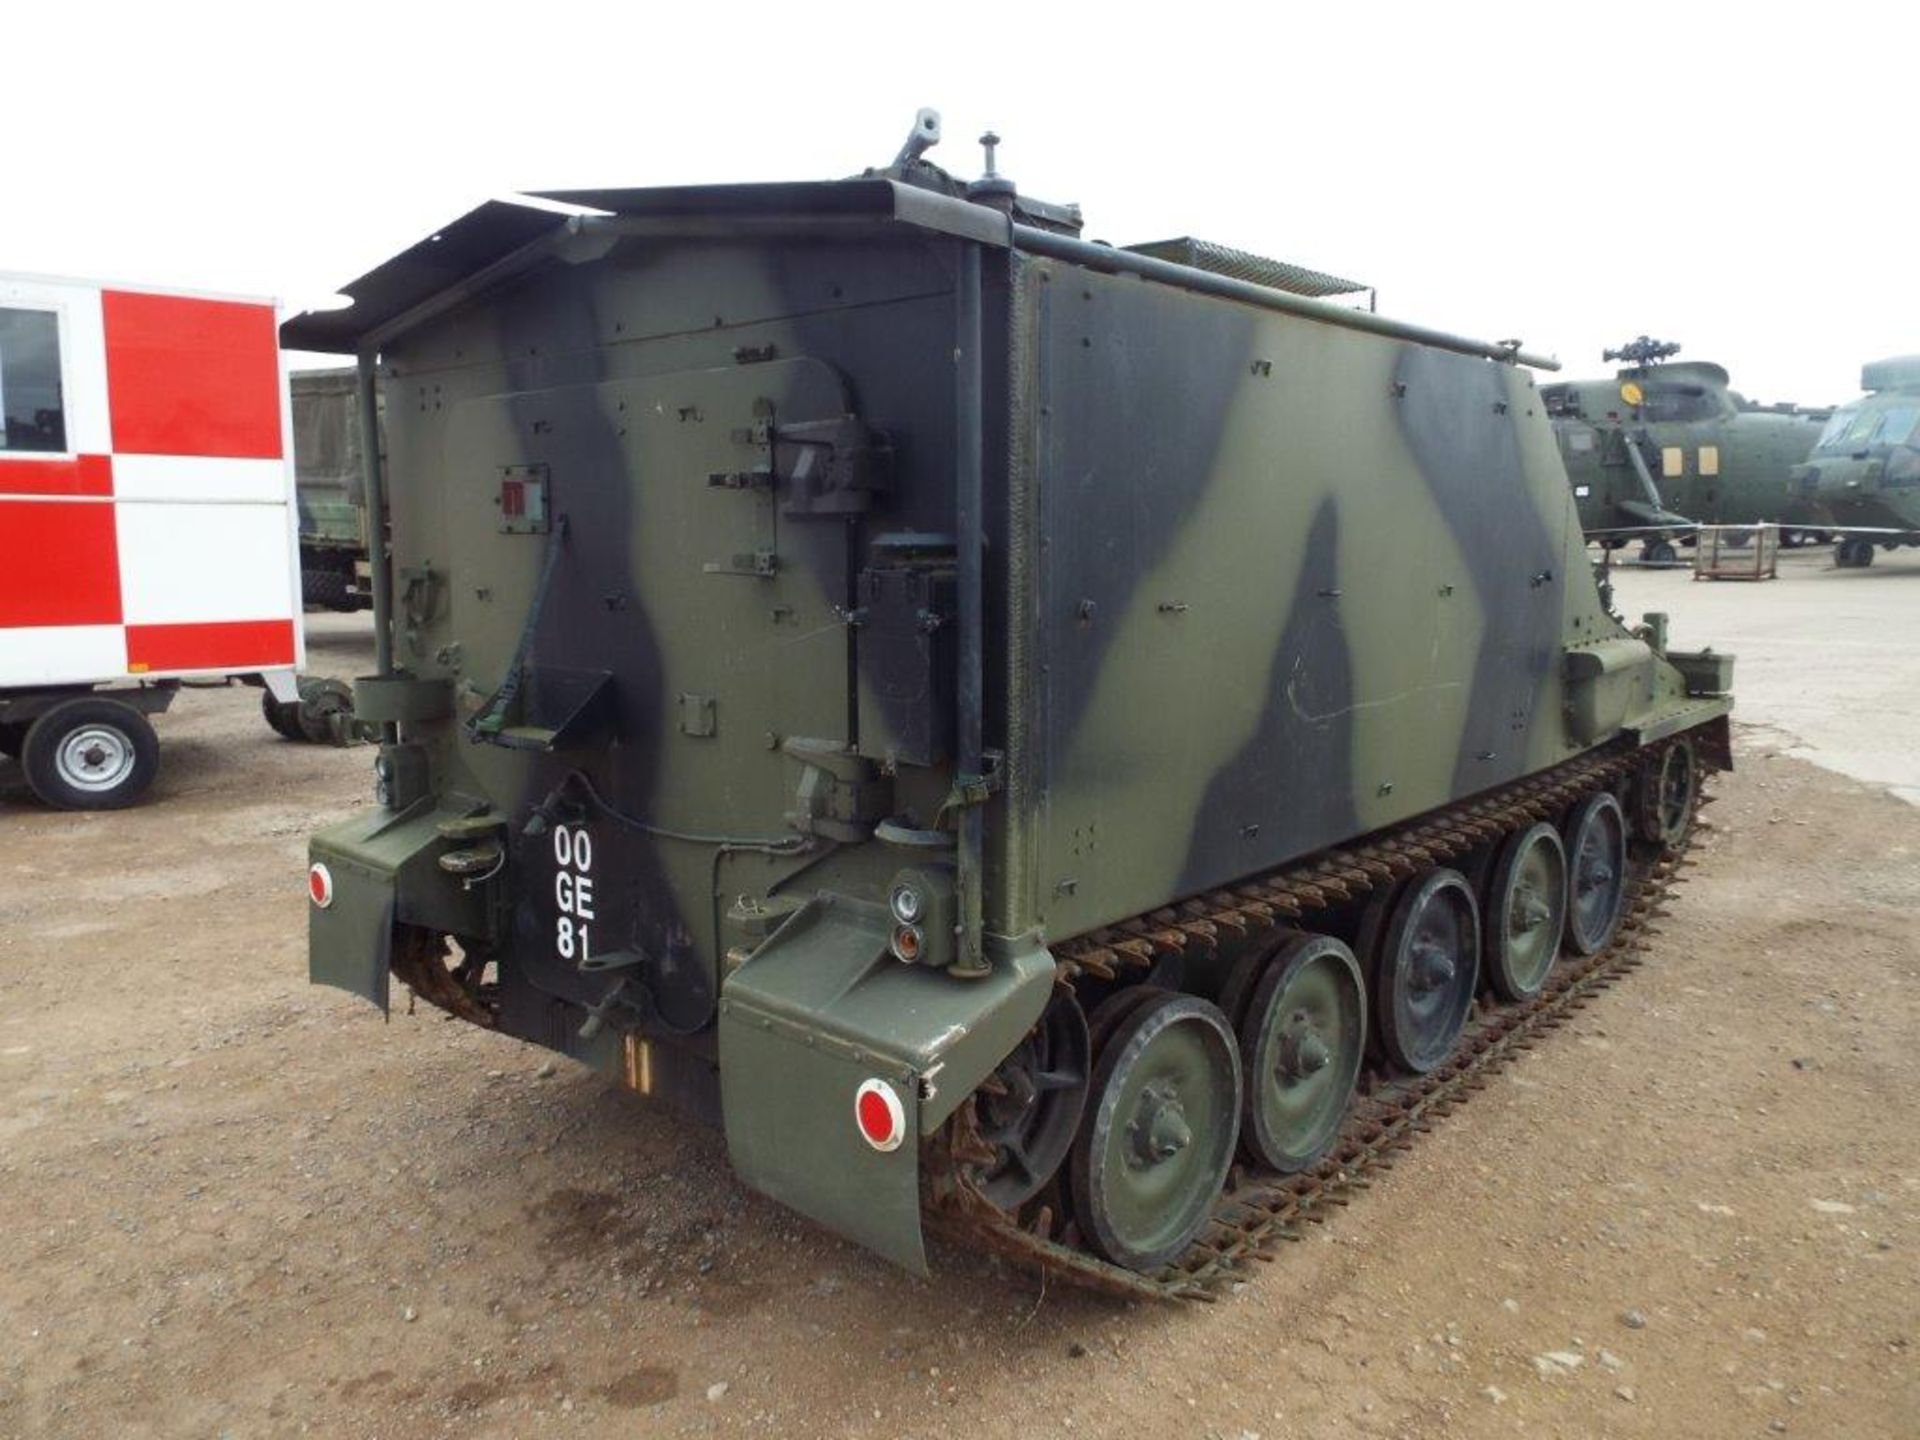 CVRT (Combat Vehicle Reconnaissance Tracked) FV105 Sultan Armoured Personnel Carrier - Image 7 of 30